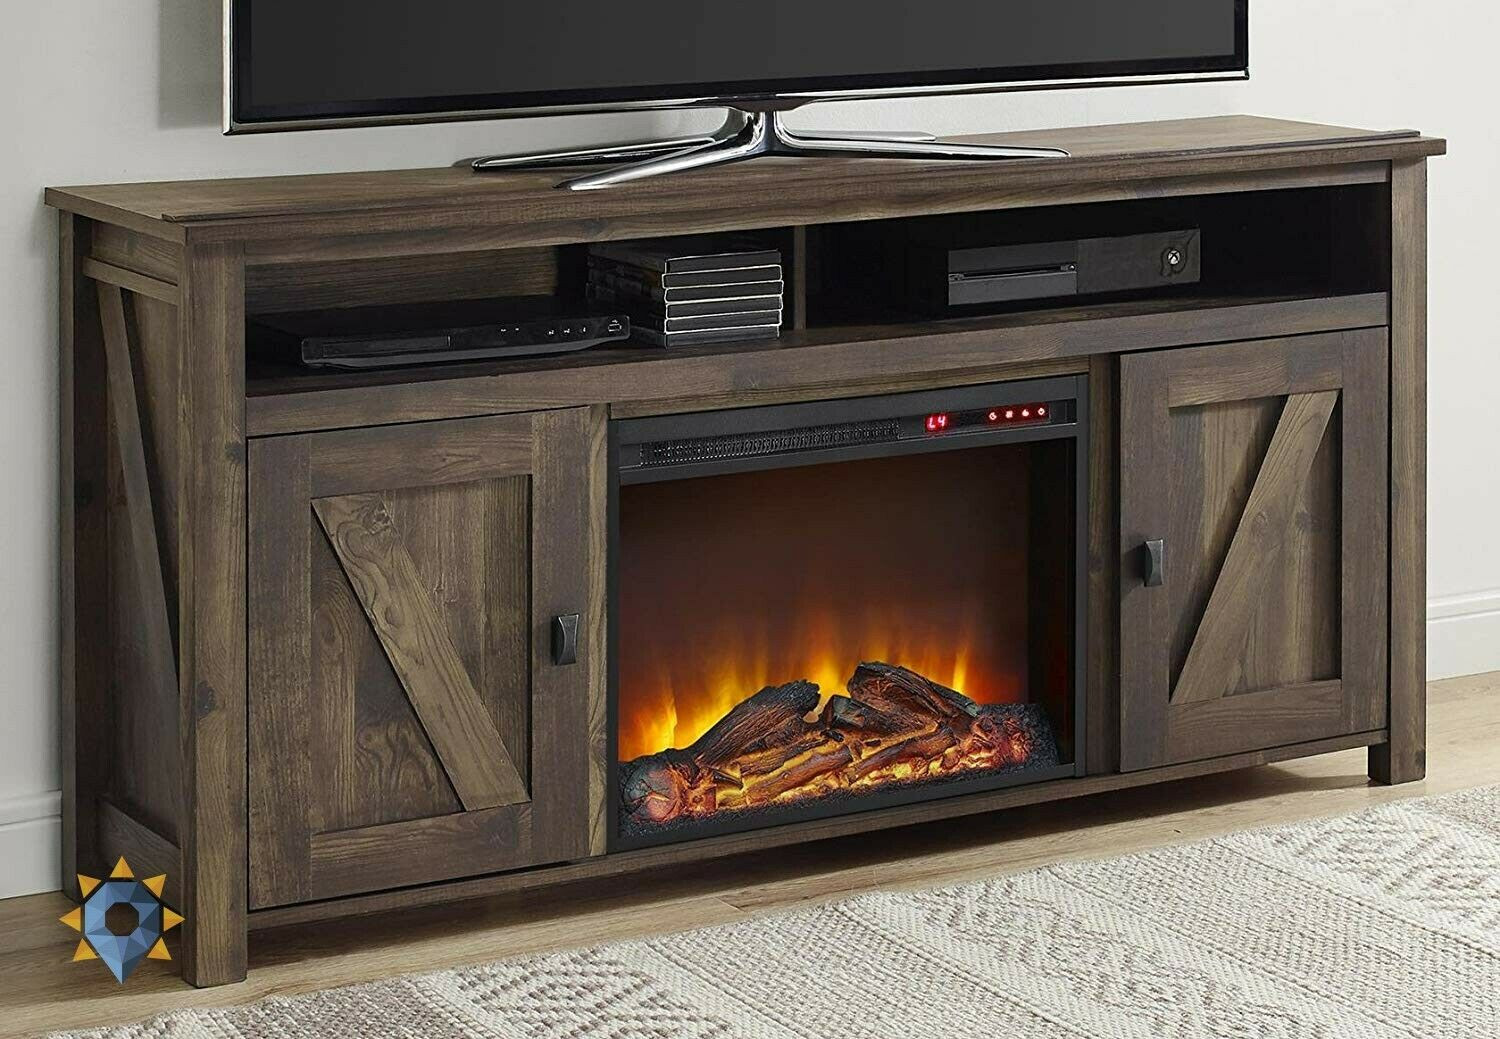 Rustic Electric Fireplace Tv Stand
 Fireplace Tv Stand Rustic Bedroom Electric Heater LED